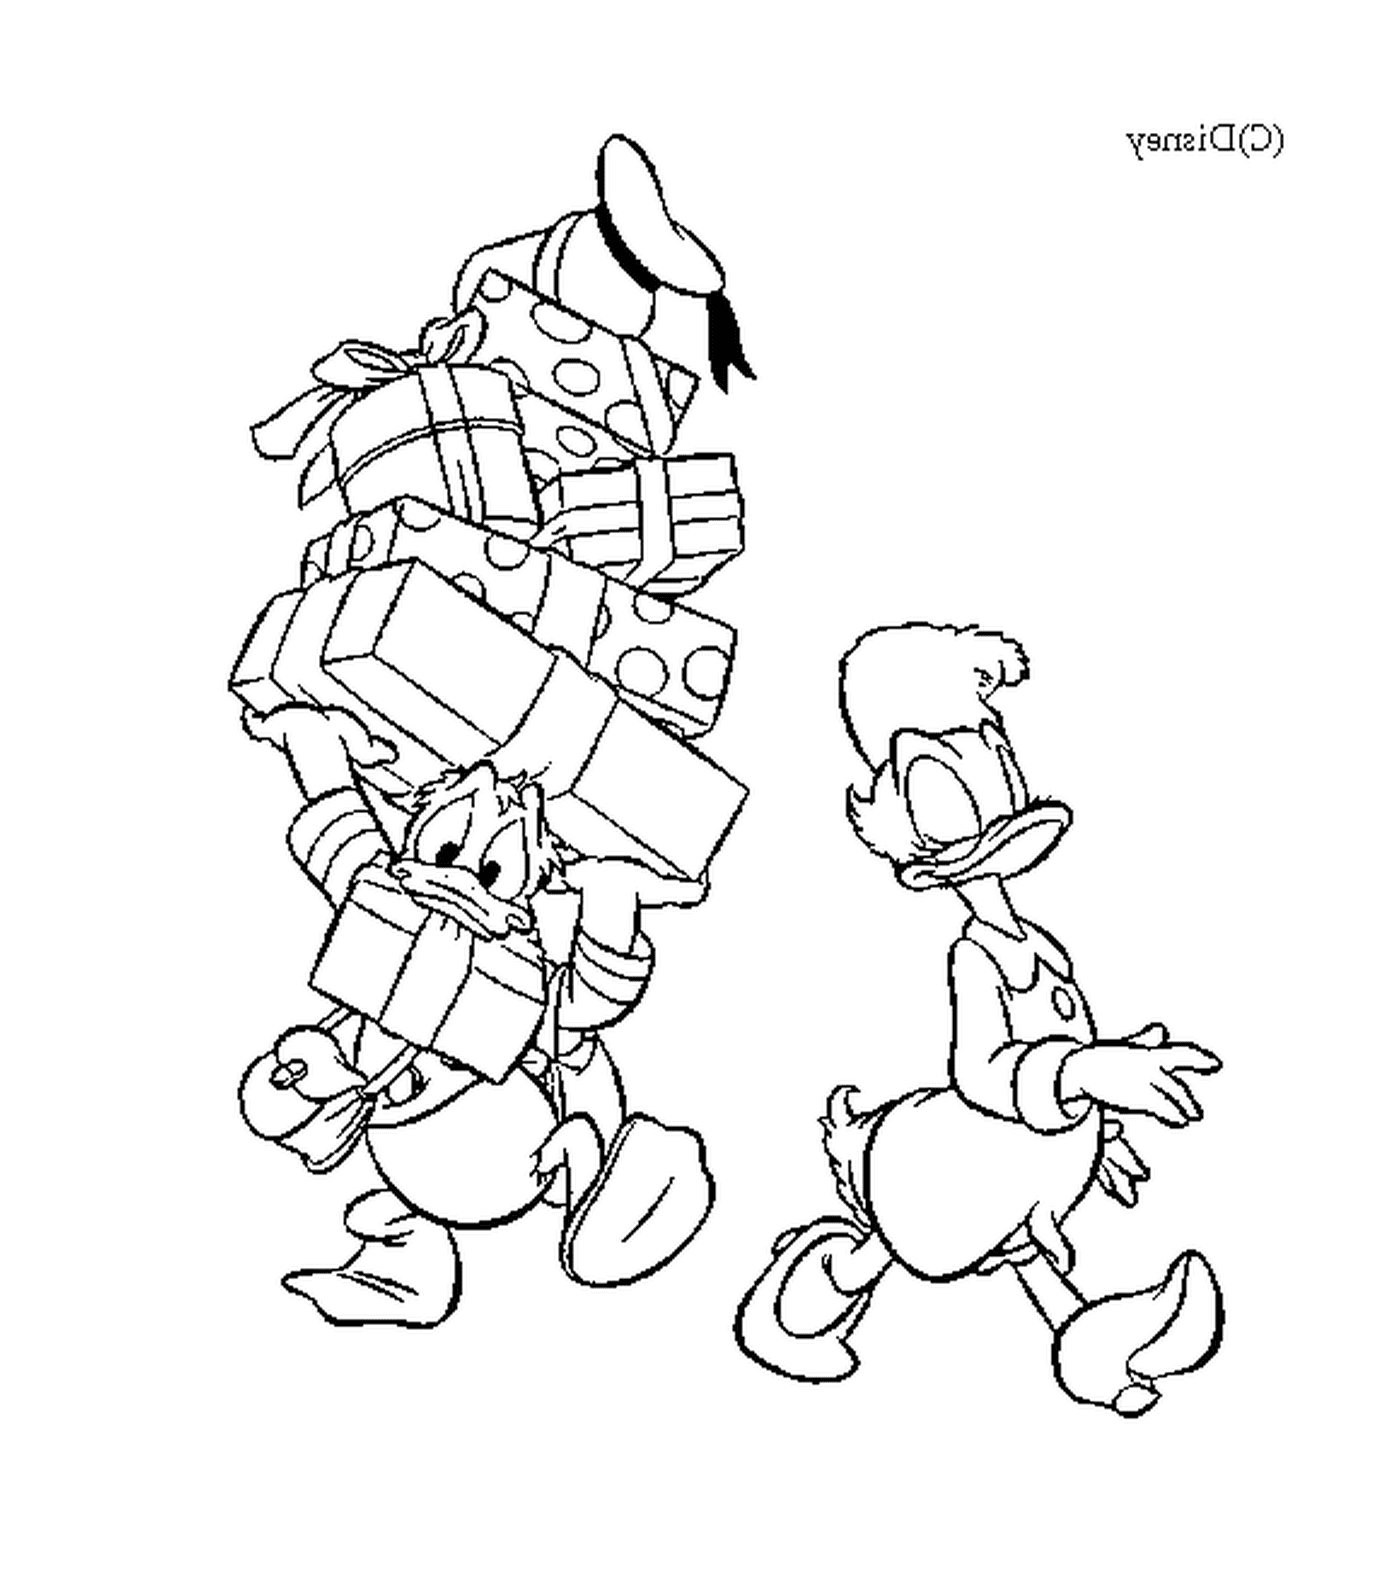  Donald's helping Daisy carry the presents 